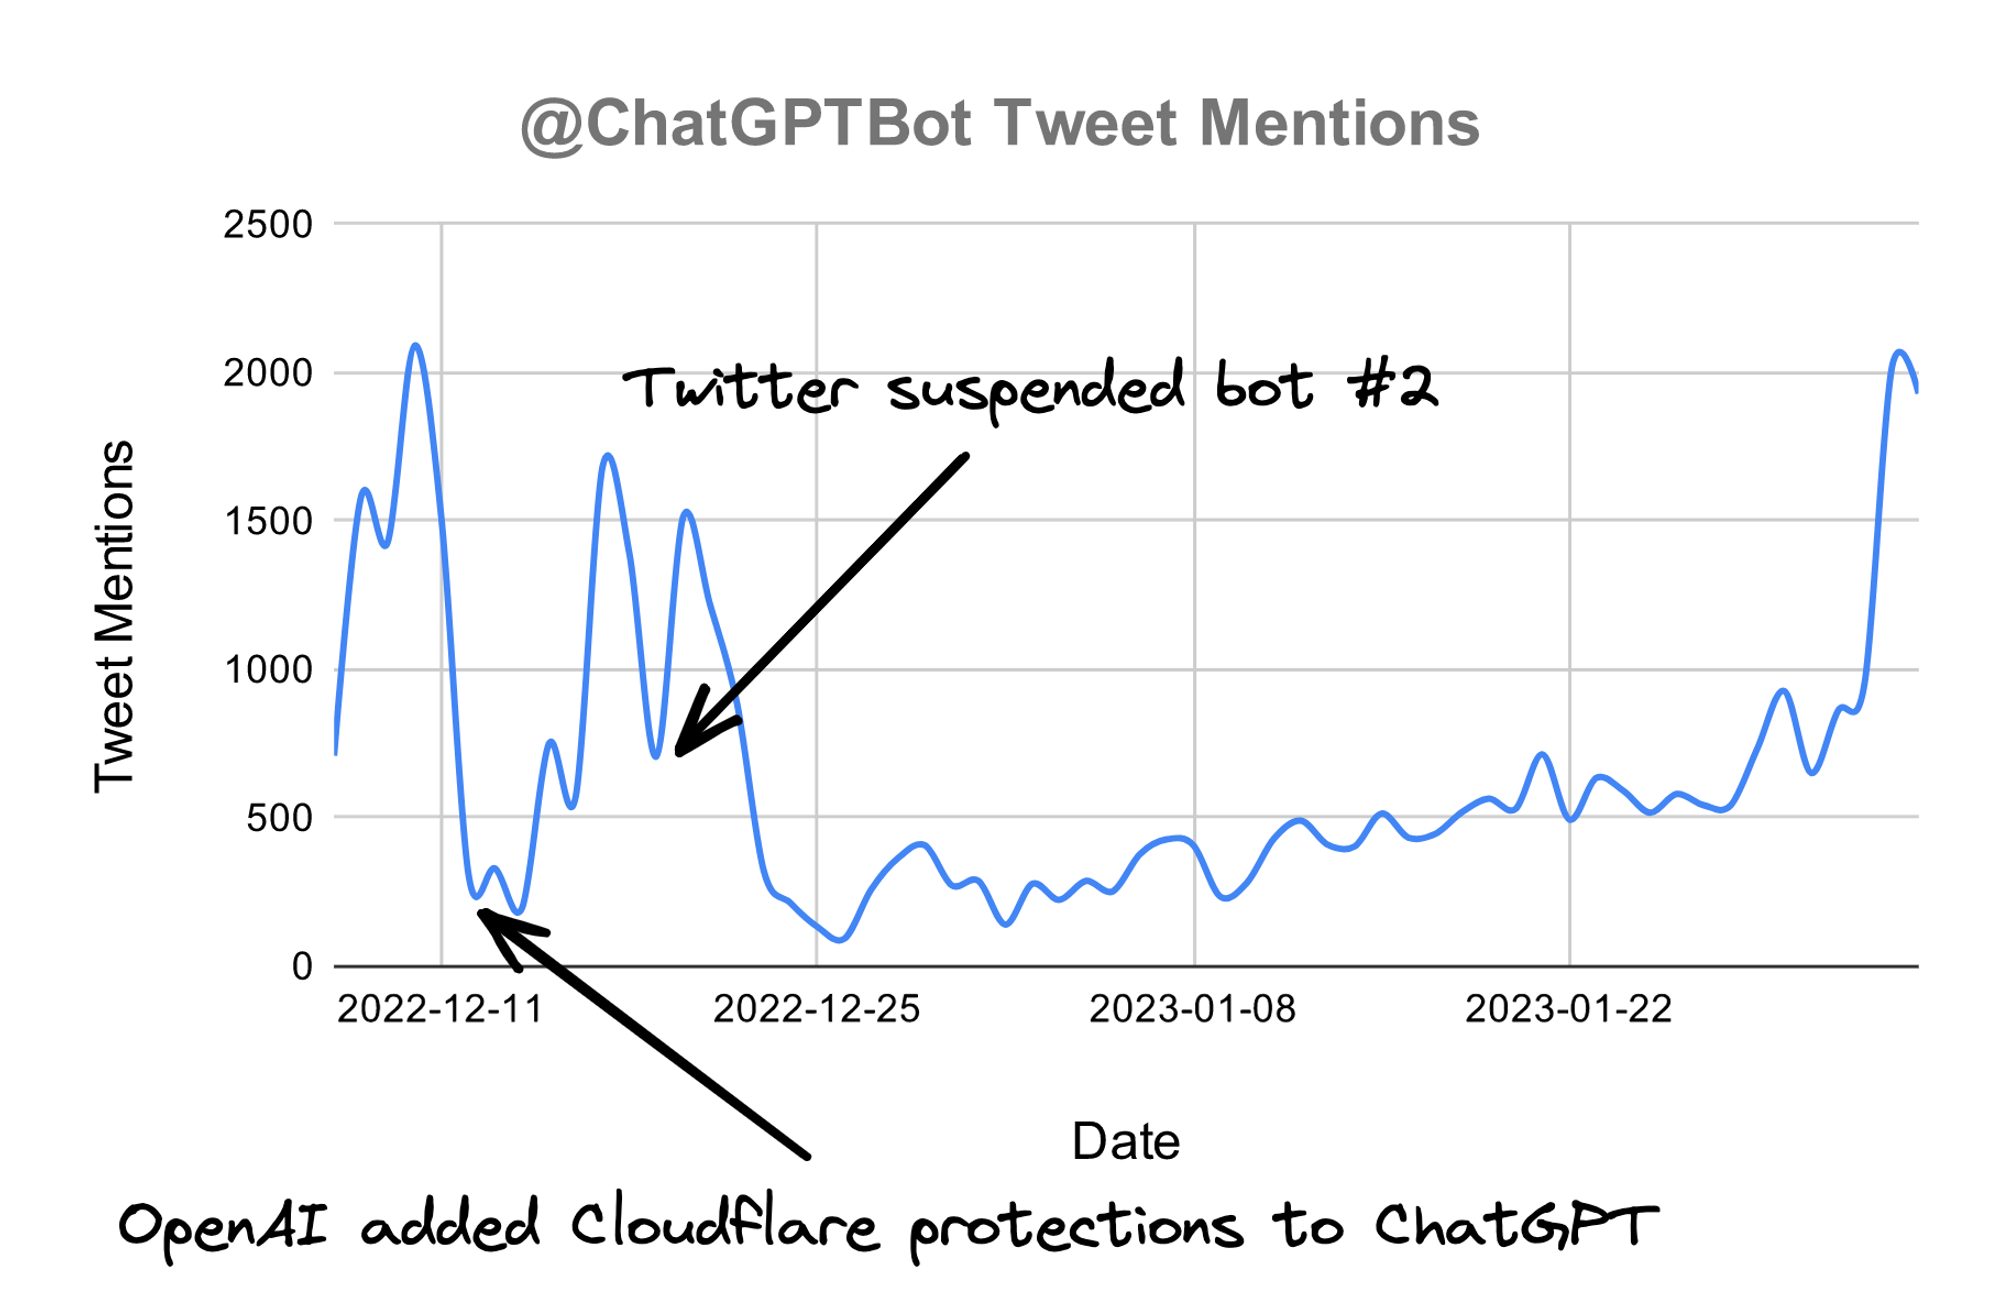 After OpenAI added Cloudflare protections to ChatGPT, the twitter bot stopped working for ~48 hours.